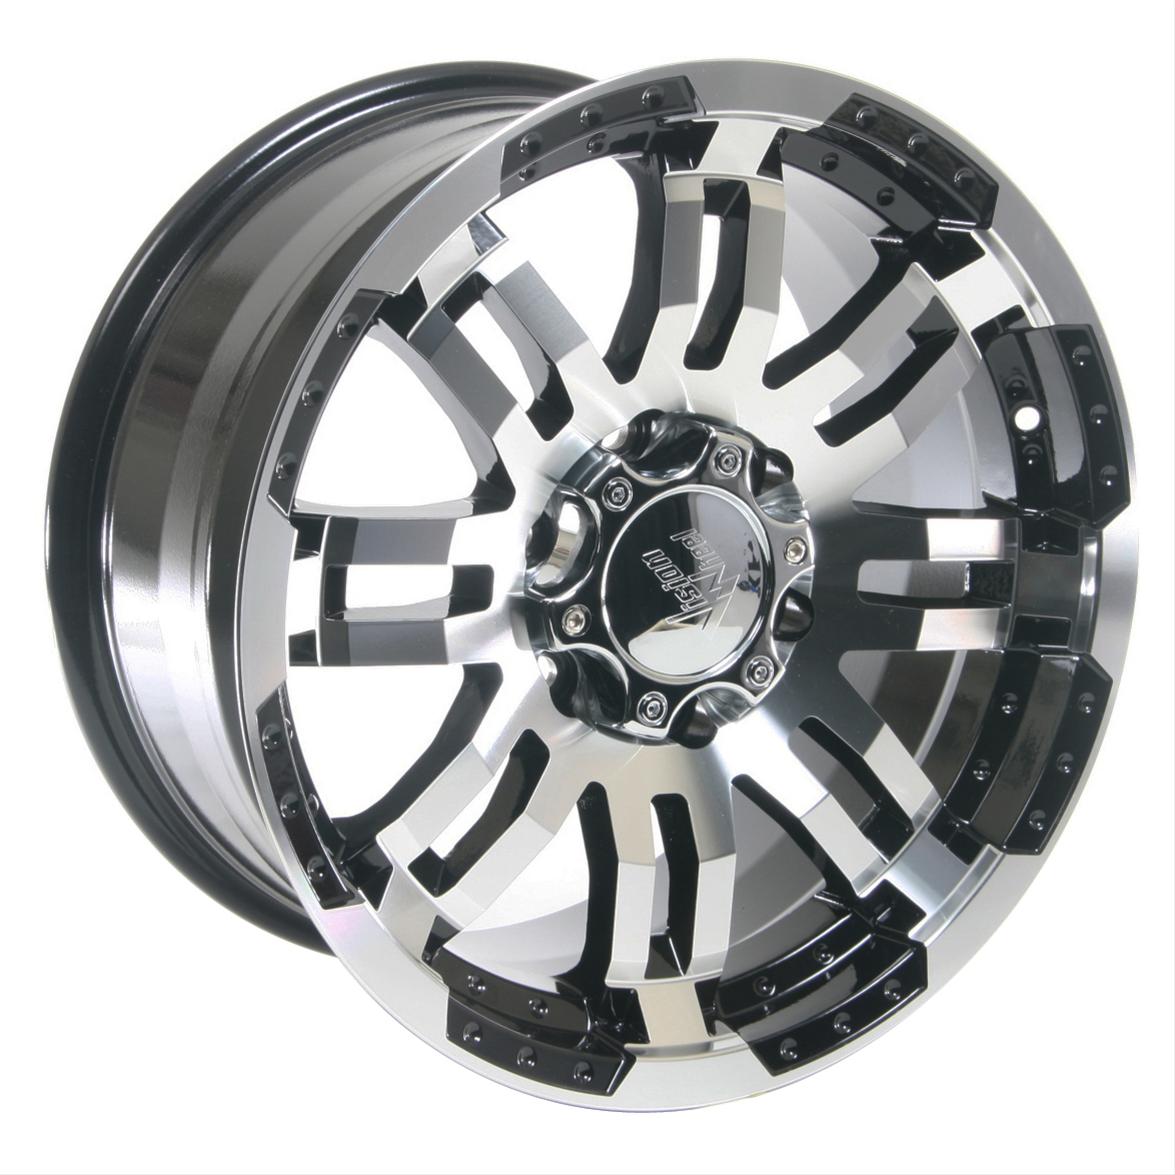 2013 FORD F 150 Vision Wheel 375H7836GBMF25 Vision Off-Road 375 Warrior ...